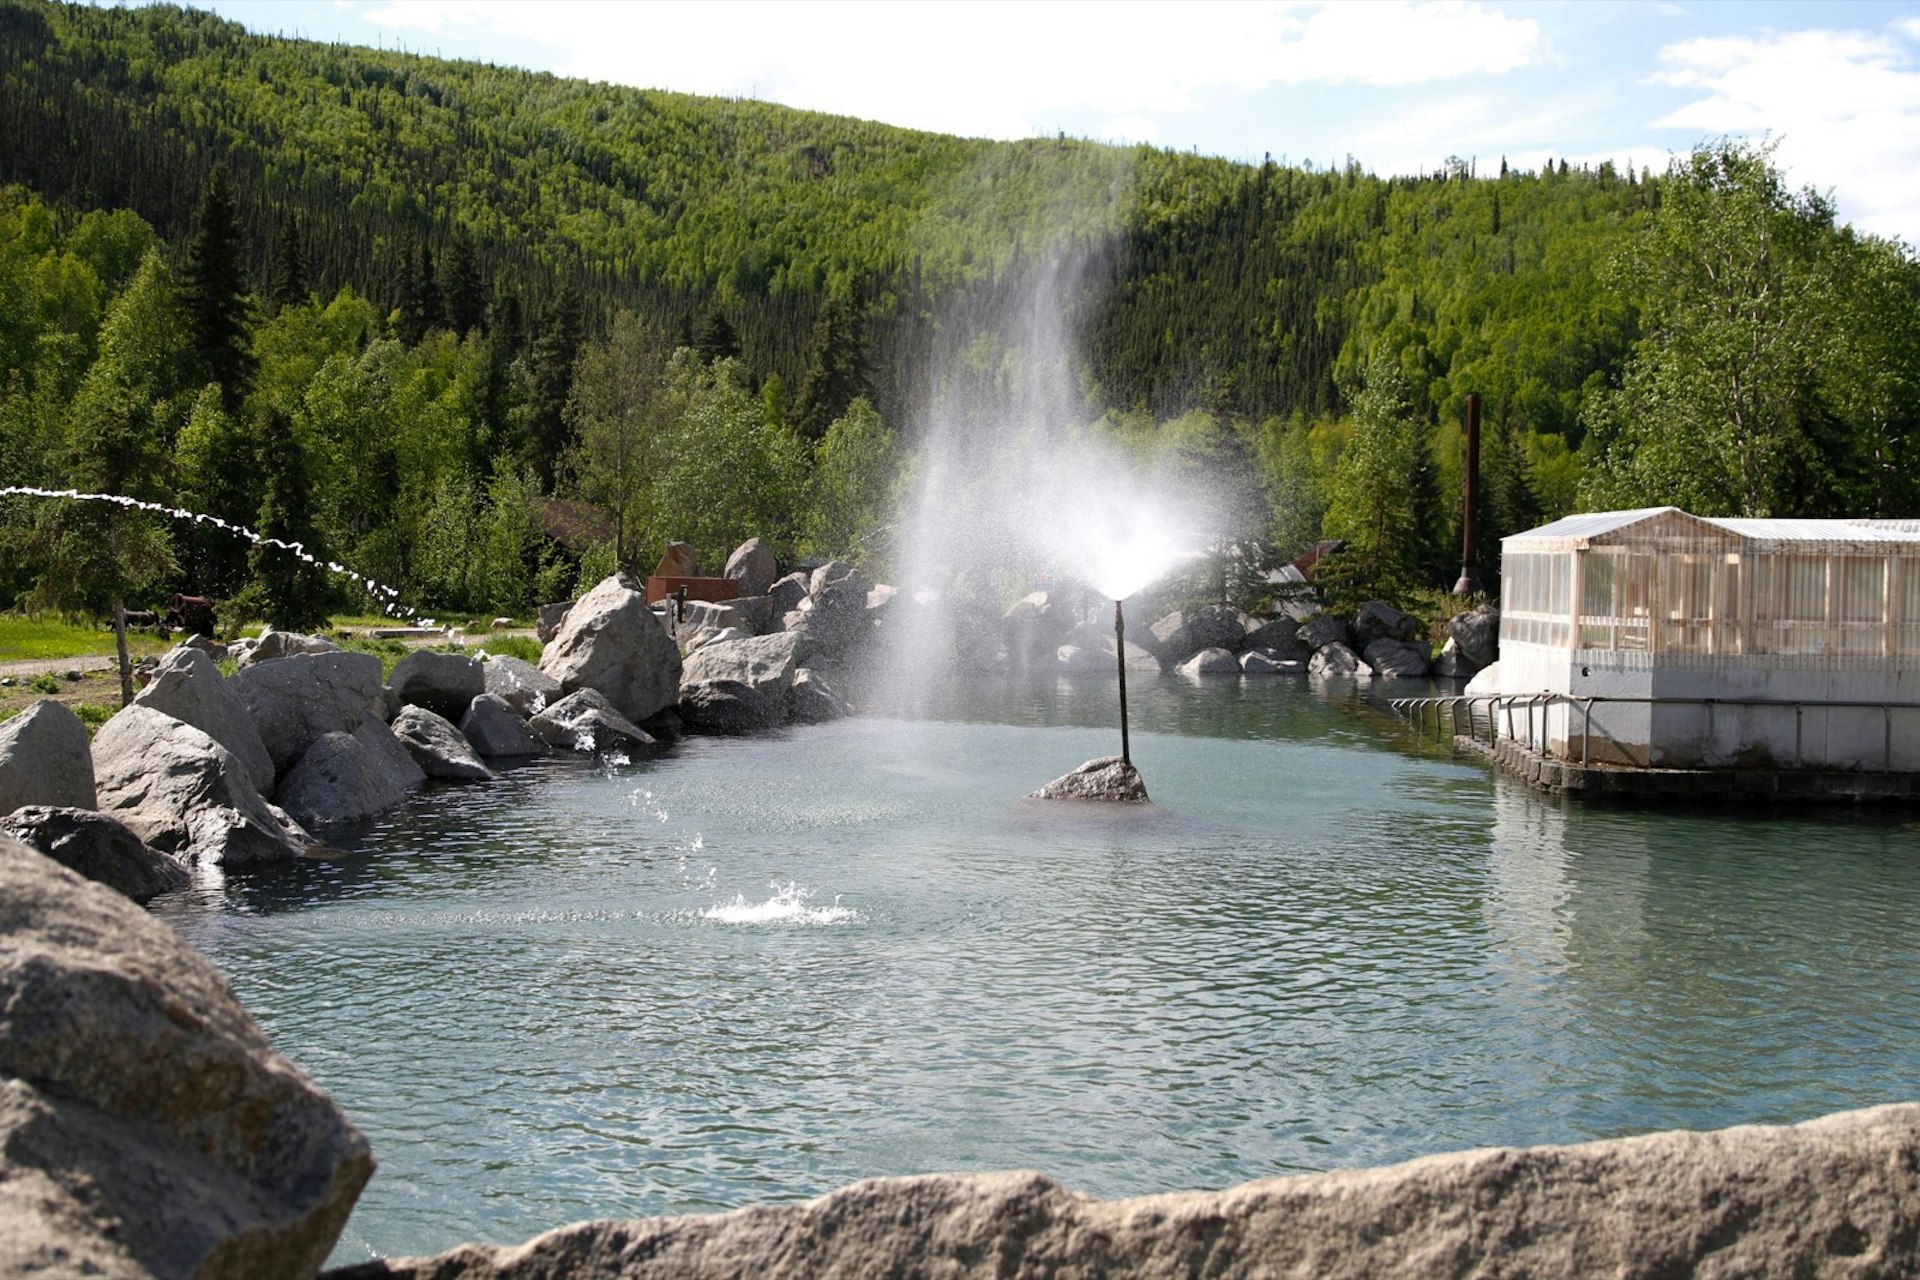 Two fountains spurt water in the late at Chena hot springs, with boulders and a small building around the perimeter